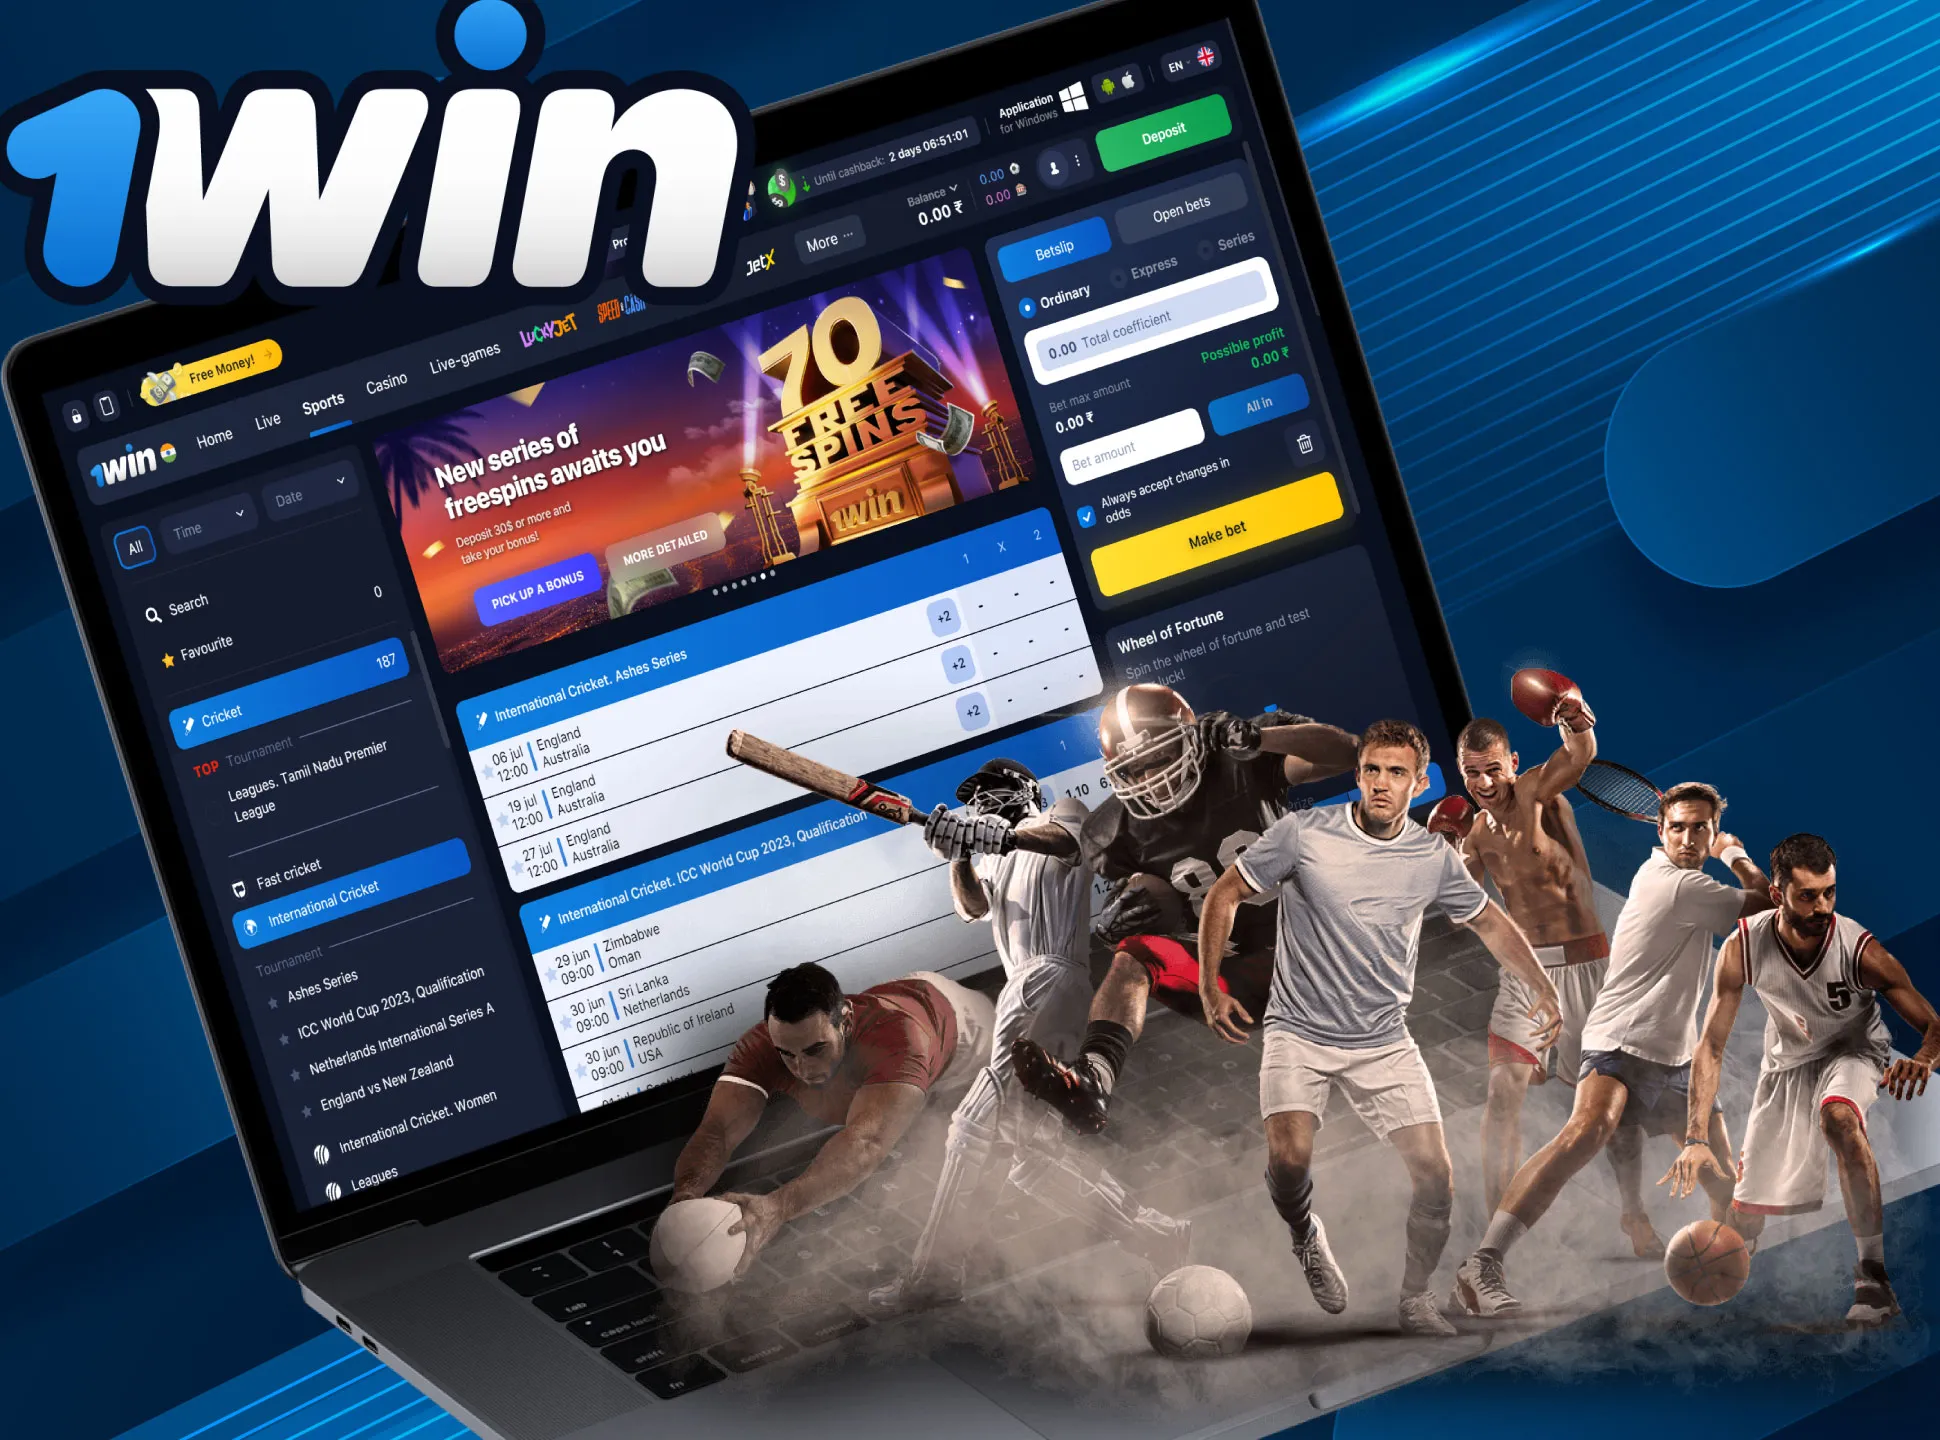 Open the sports betting section of 1win and choose cricket.